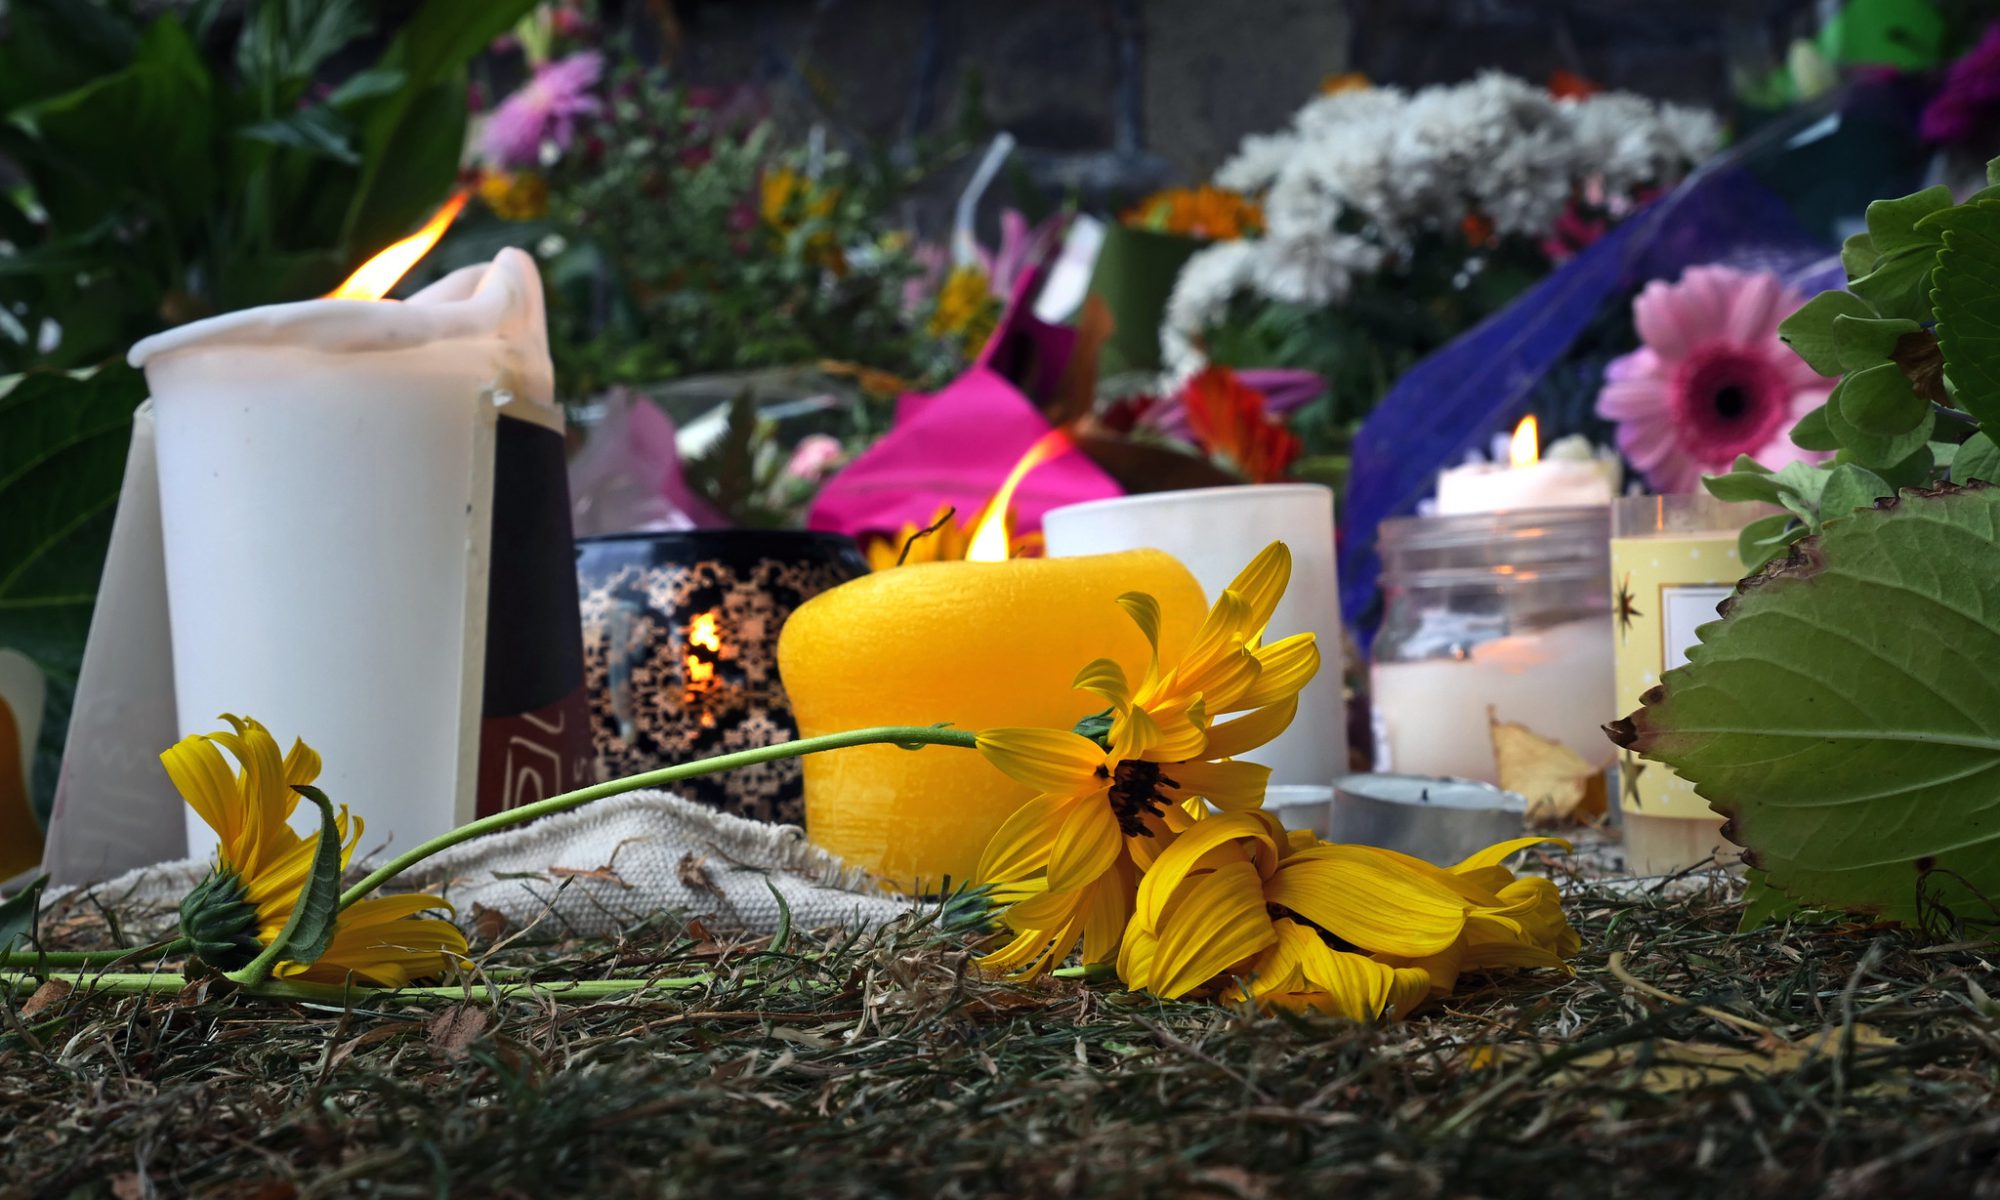 Photograph of candles and flowers arranged to mourn victims of the shootings